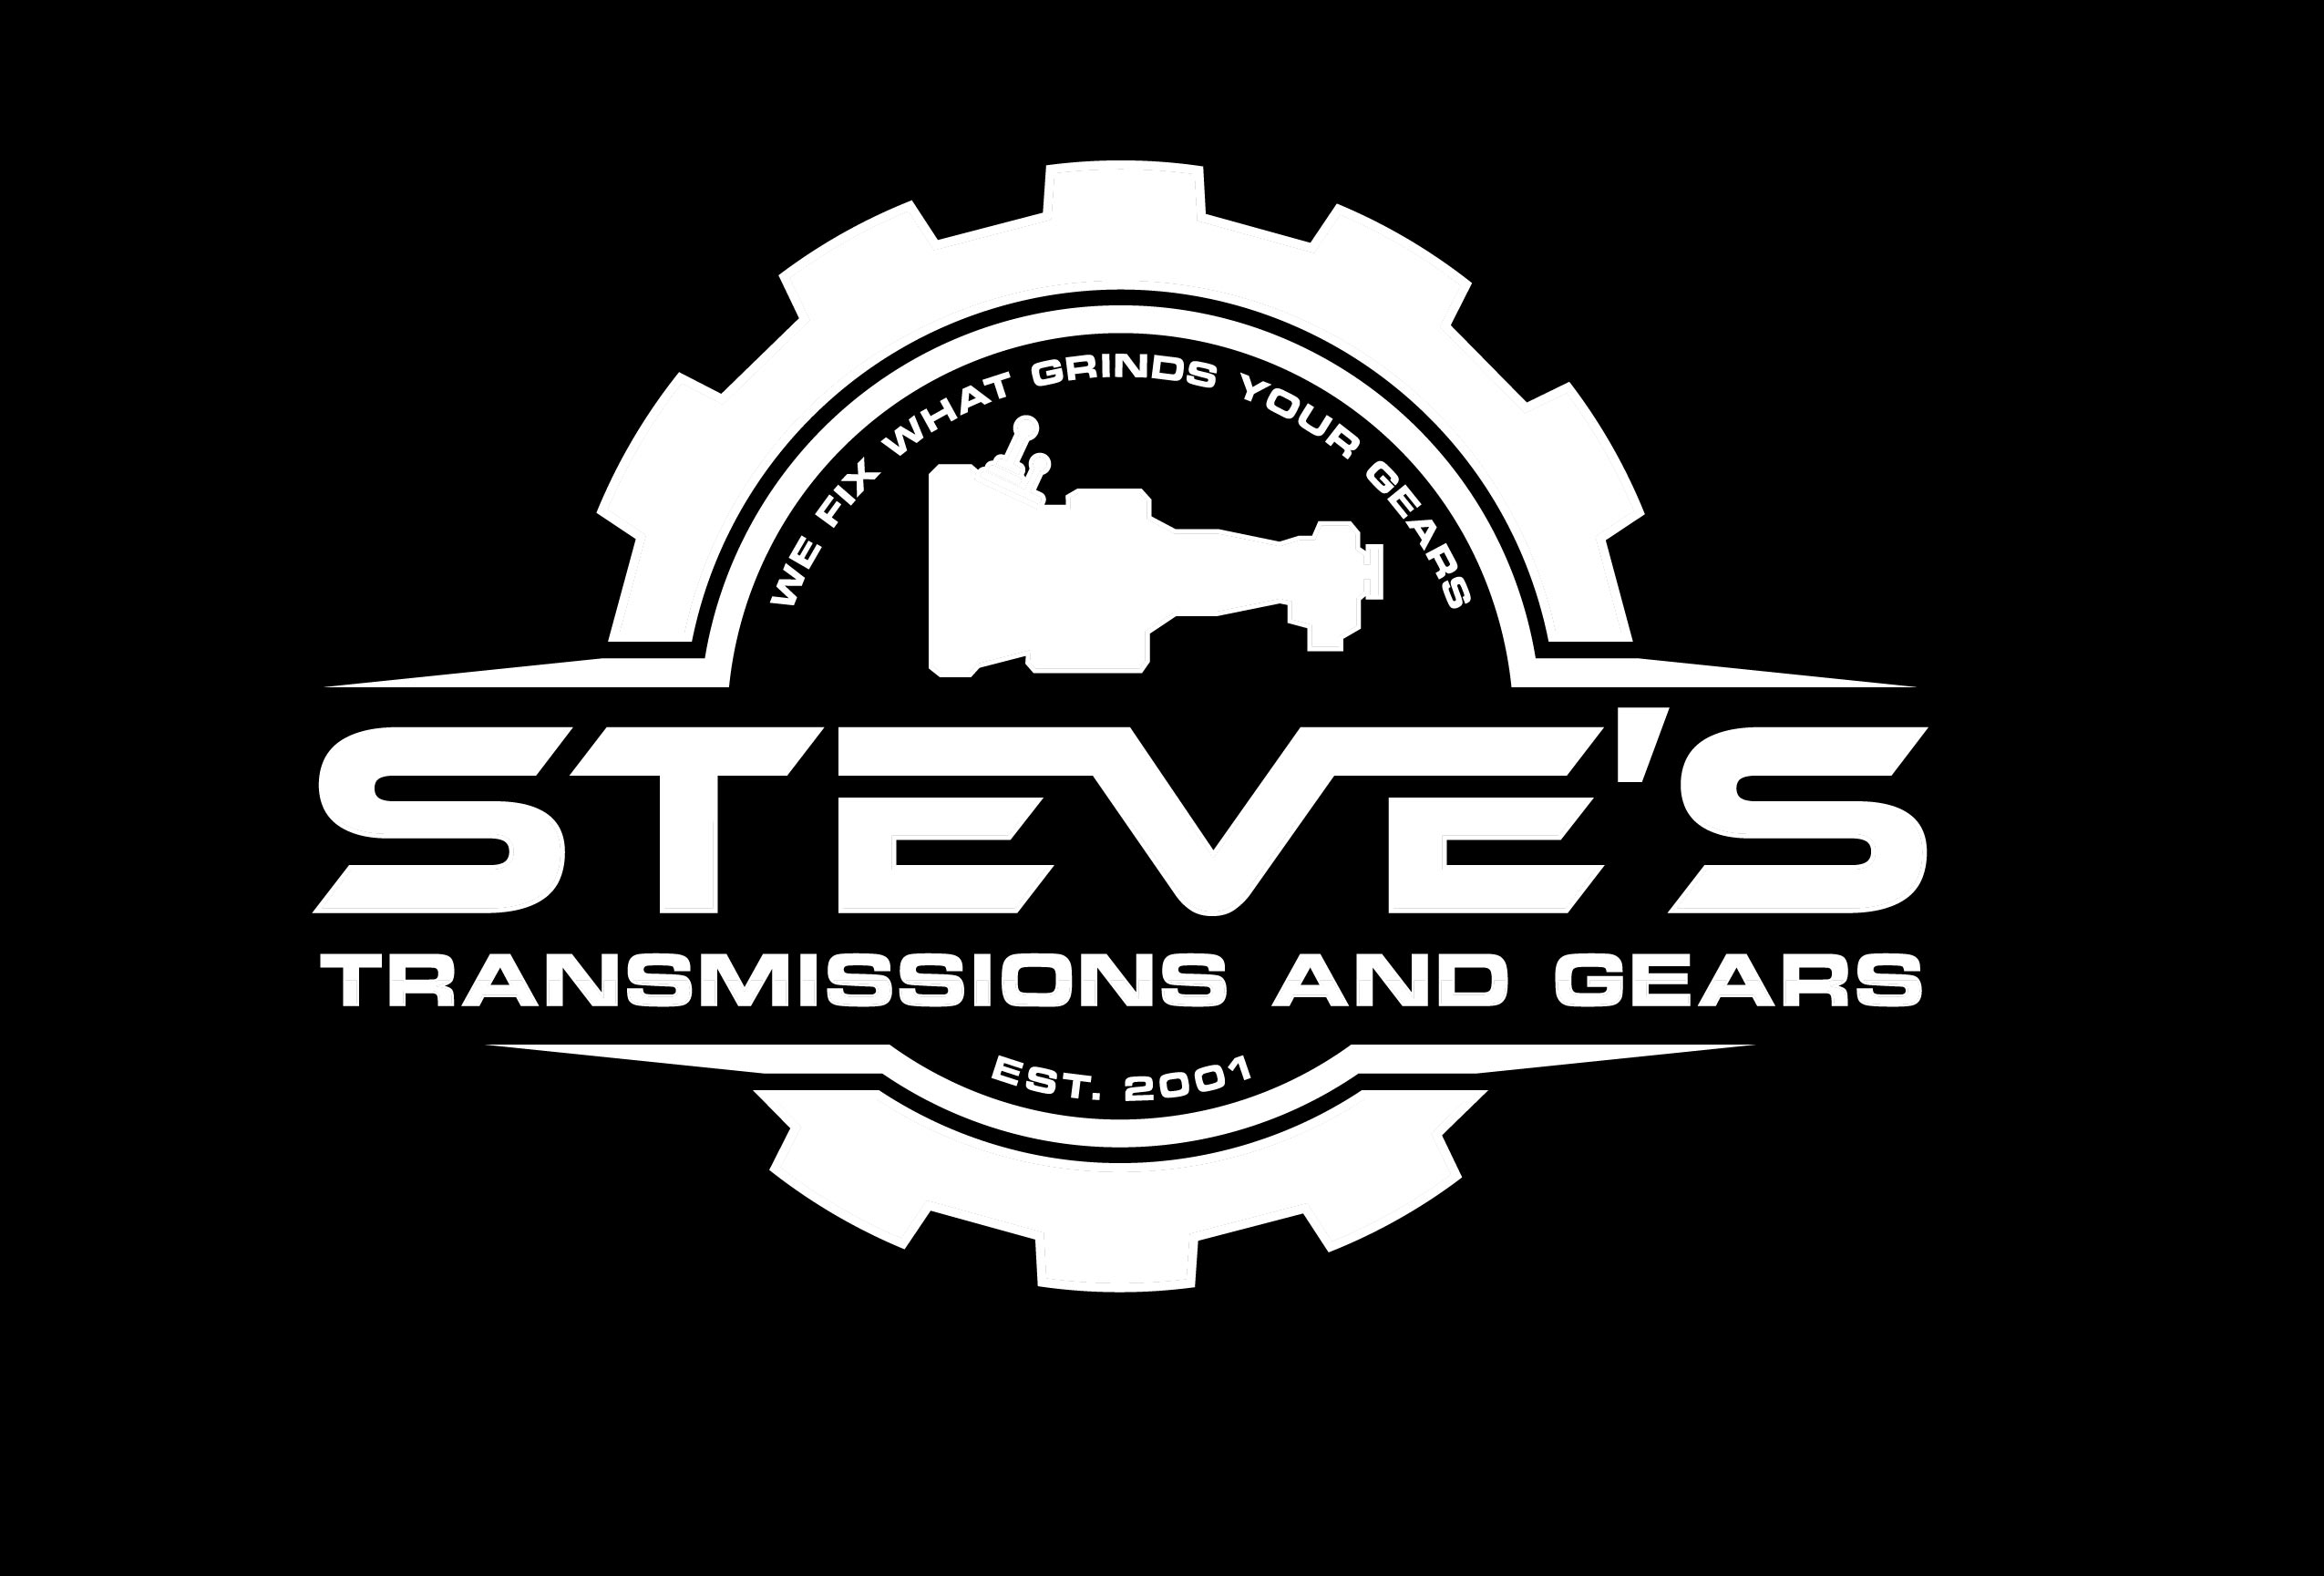 Steve's Transmissions and Gears - 303-744-7904